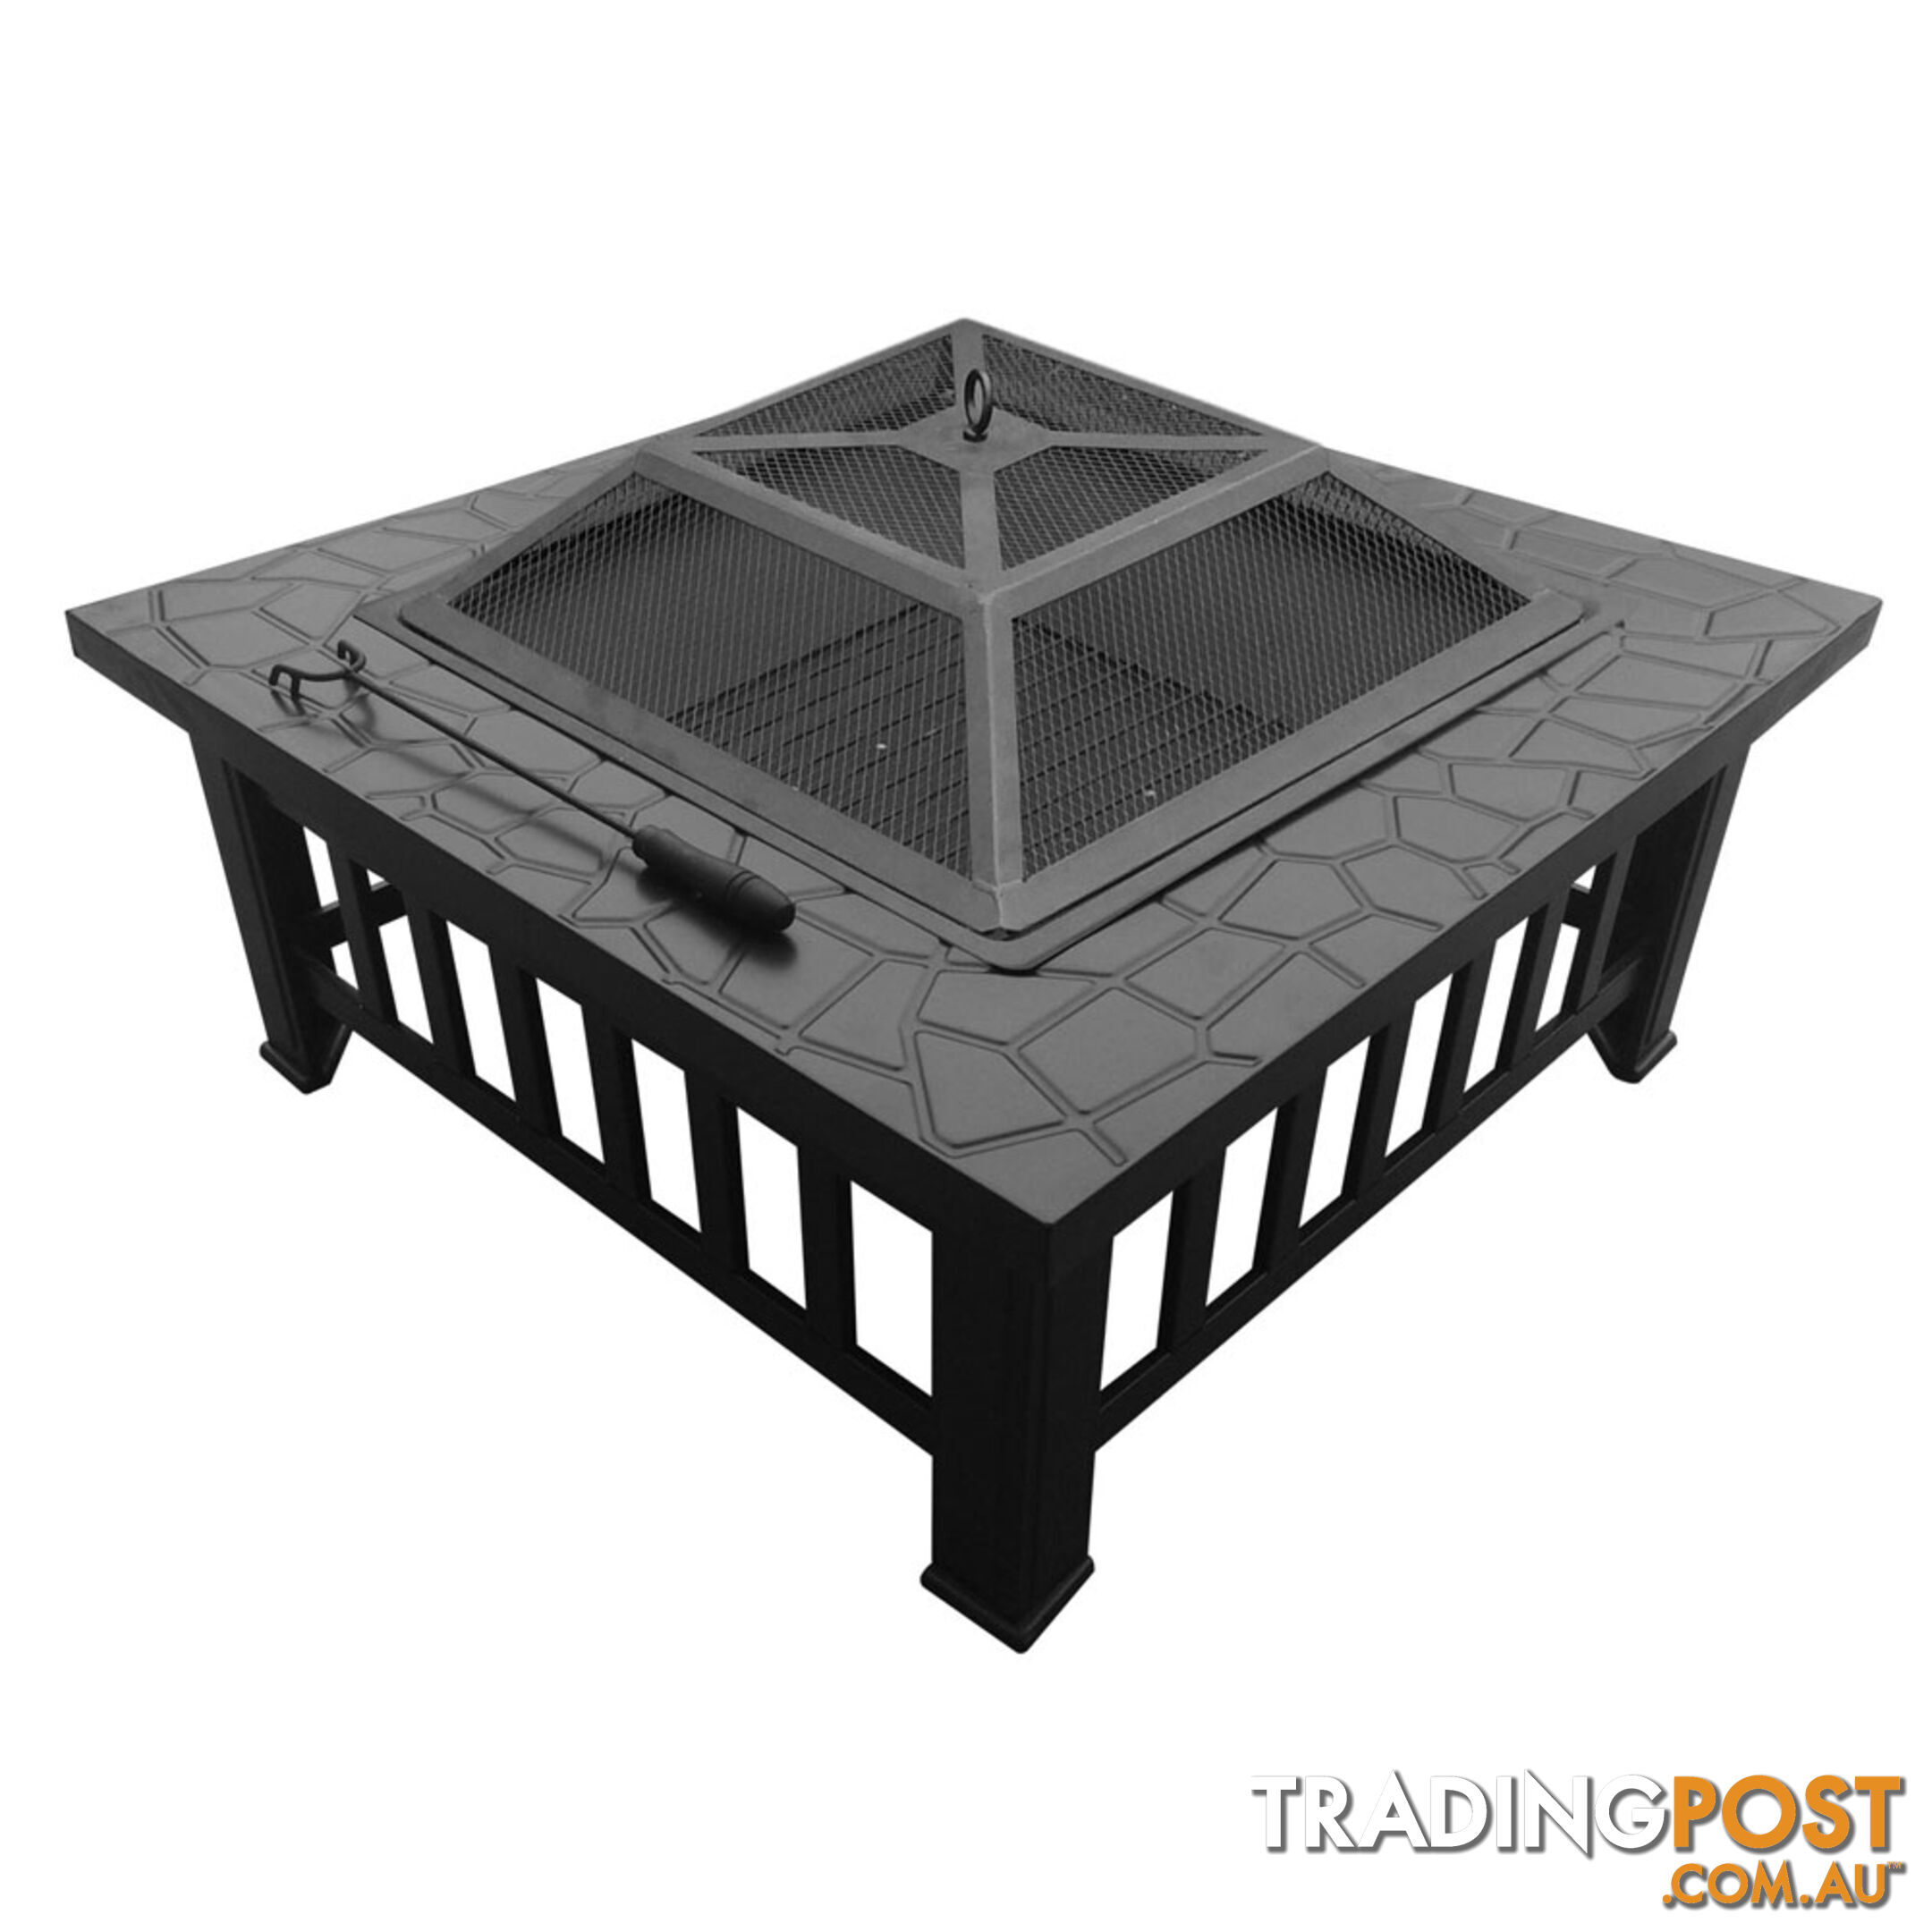 2 In 1 Outdoor Garden/Patio/Camping Fire Pit BBQ Table Grill Fireplace